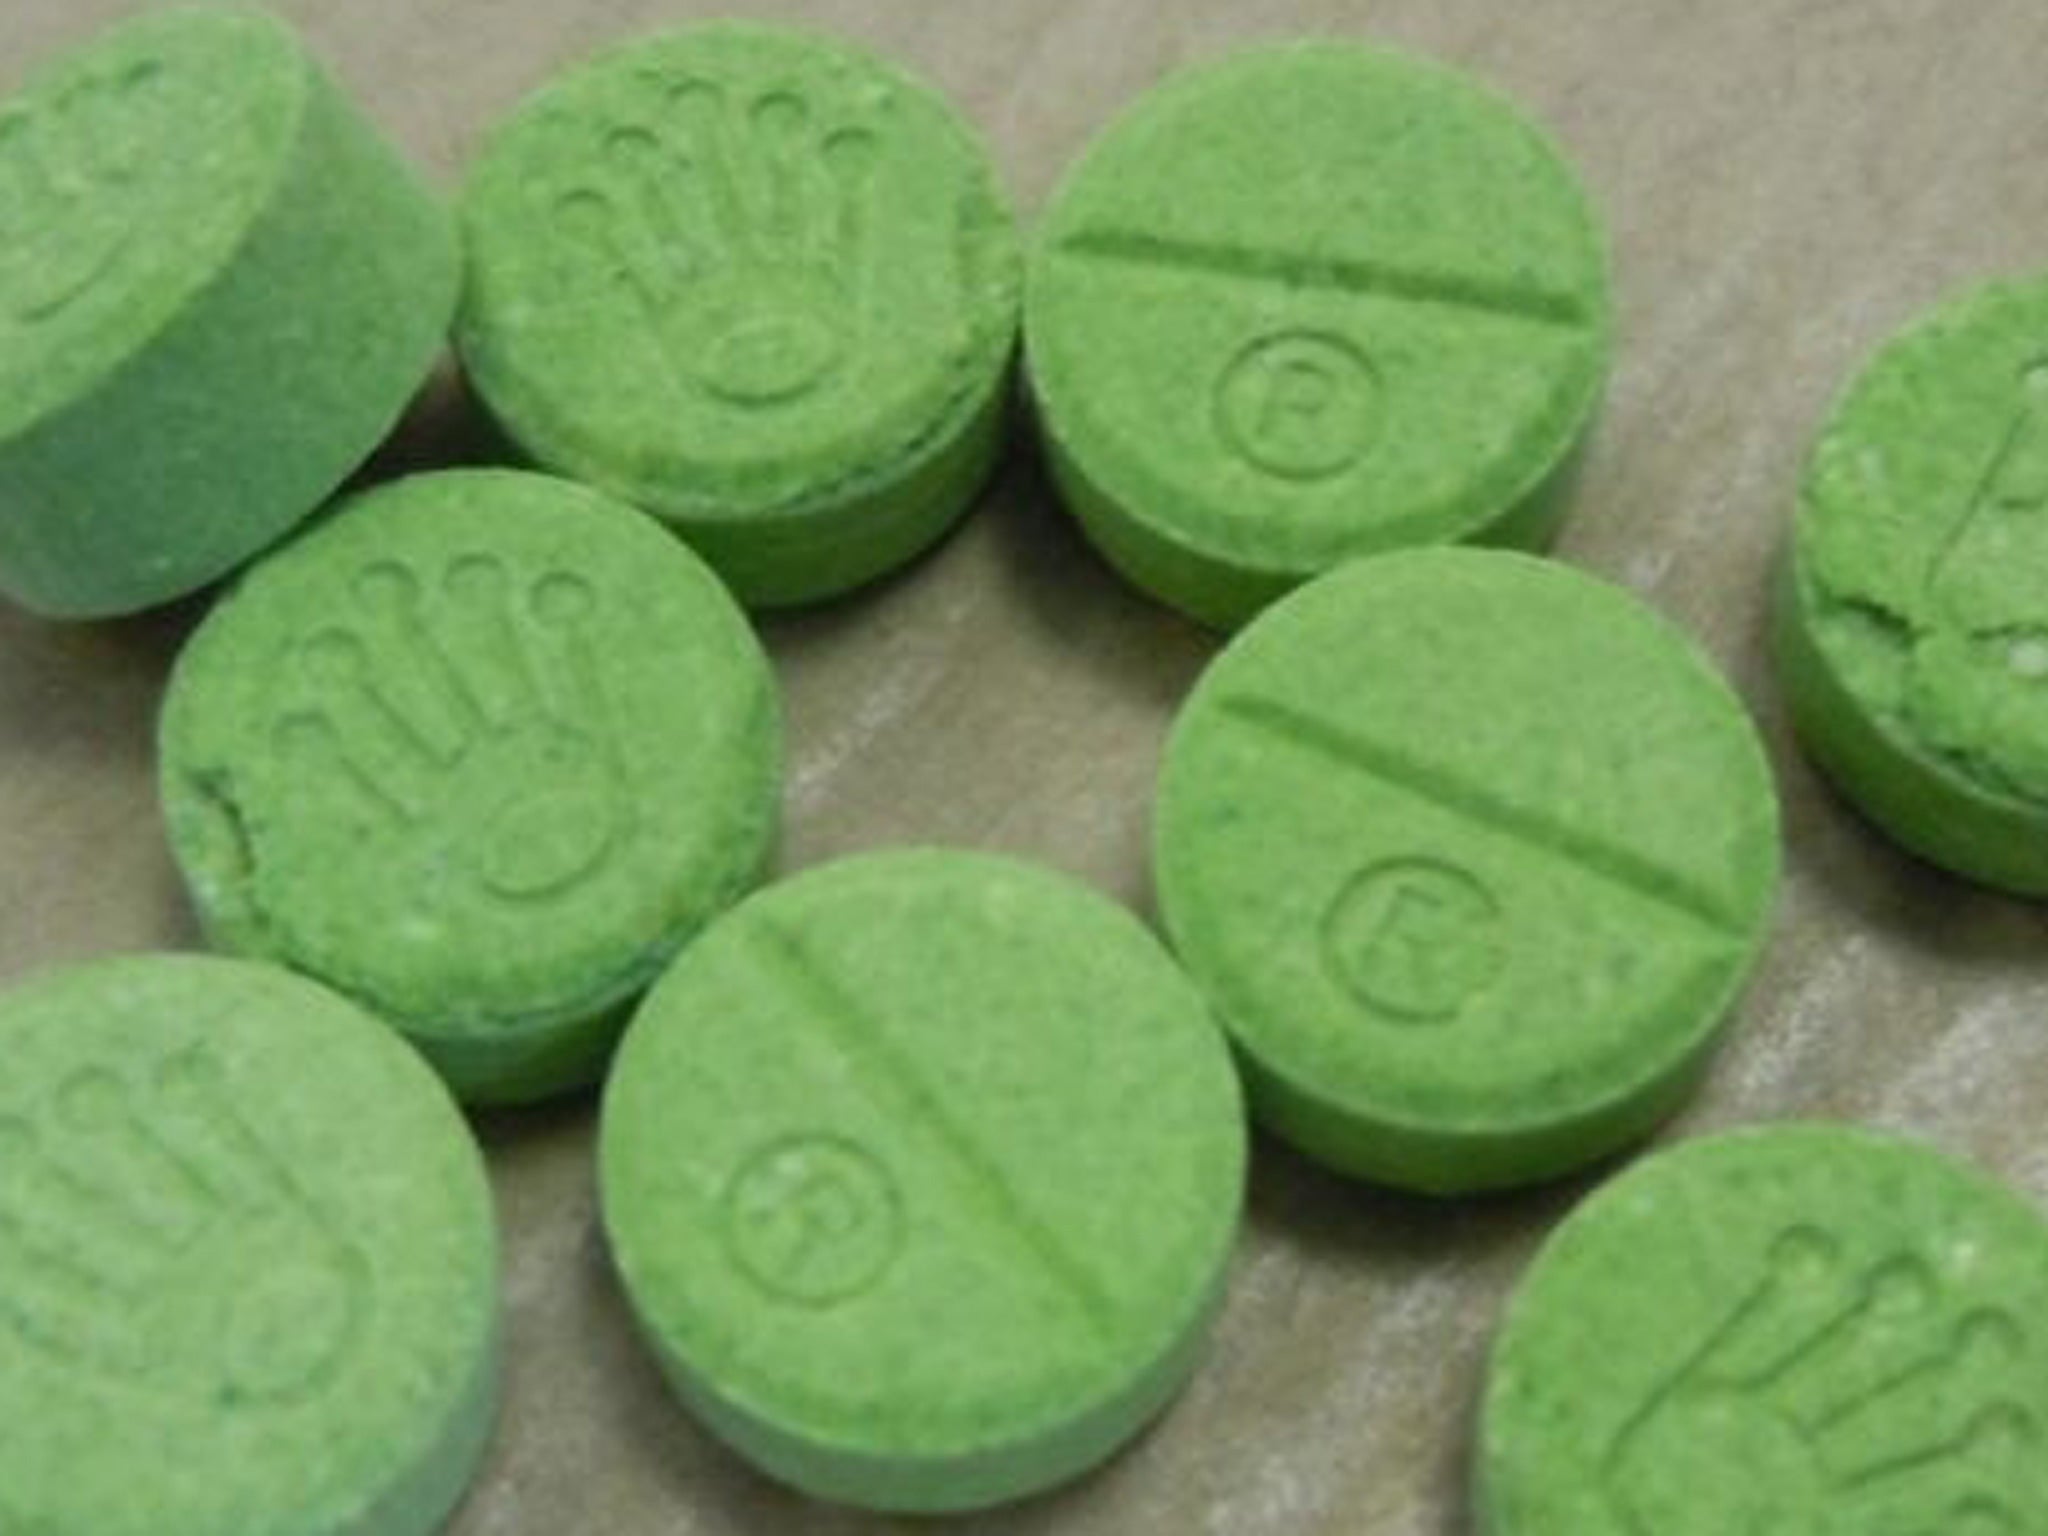 A photo issued by police Scotland of some tablets that are being sold as ecstasy that contain dangerous chemicals following a seventh death related to drug-taking